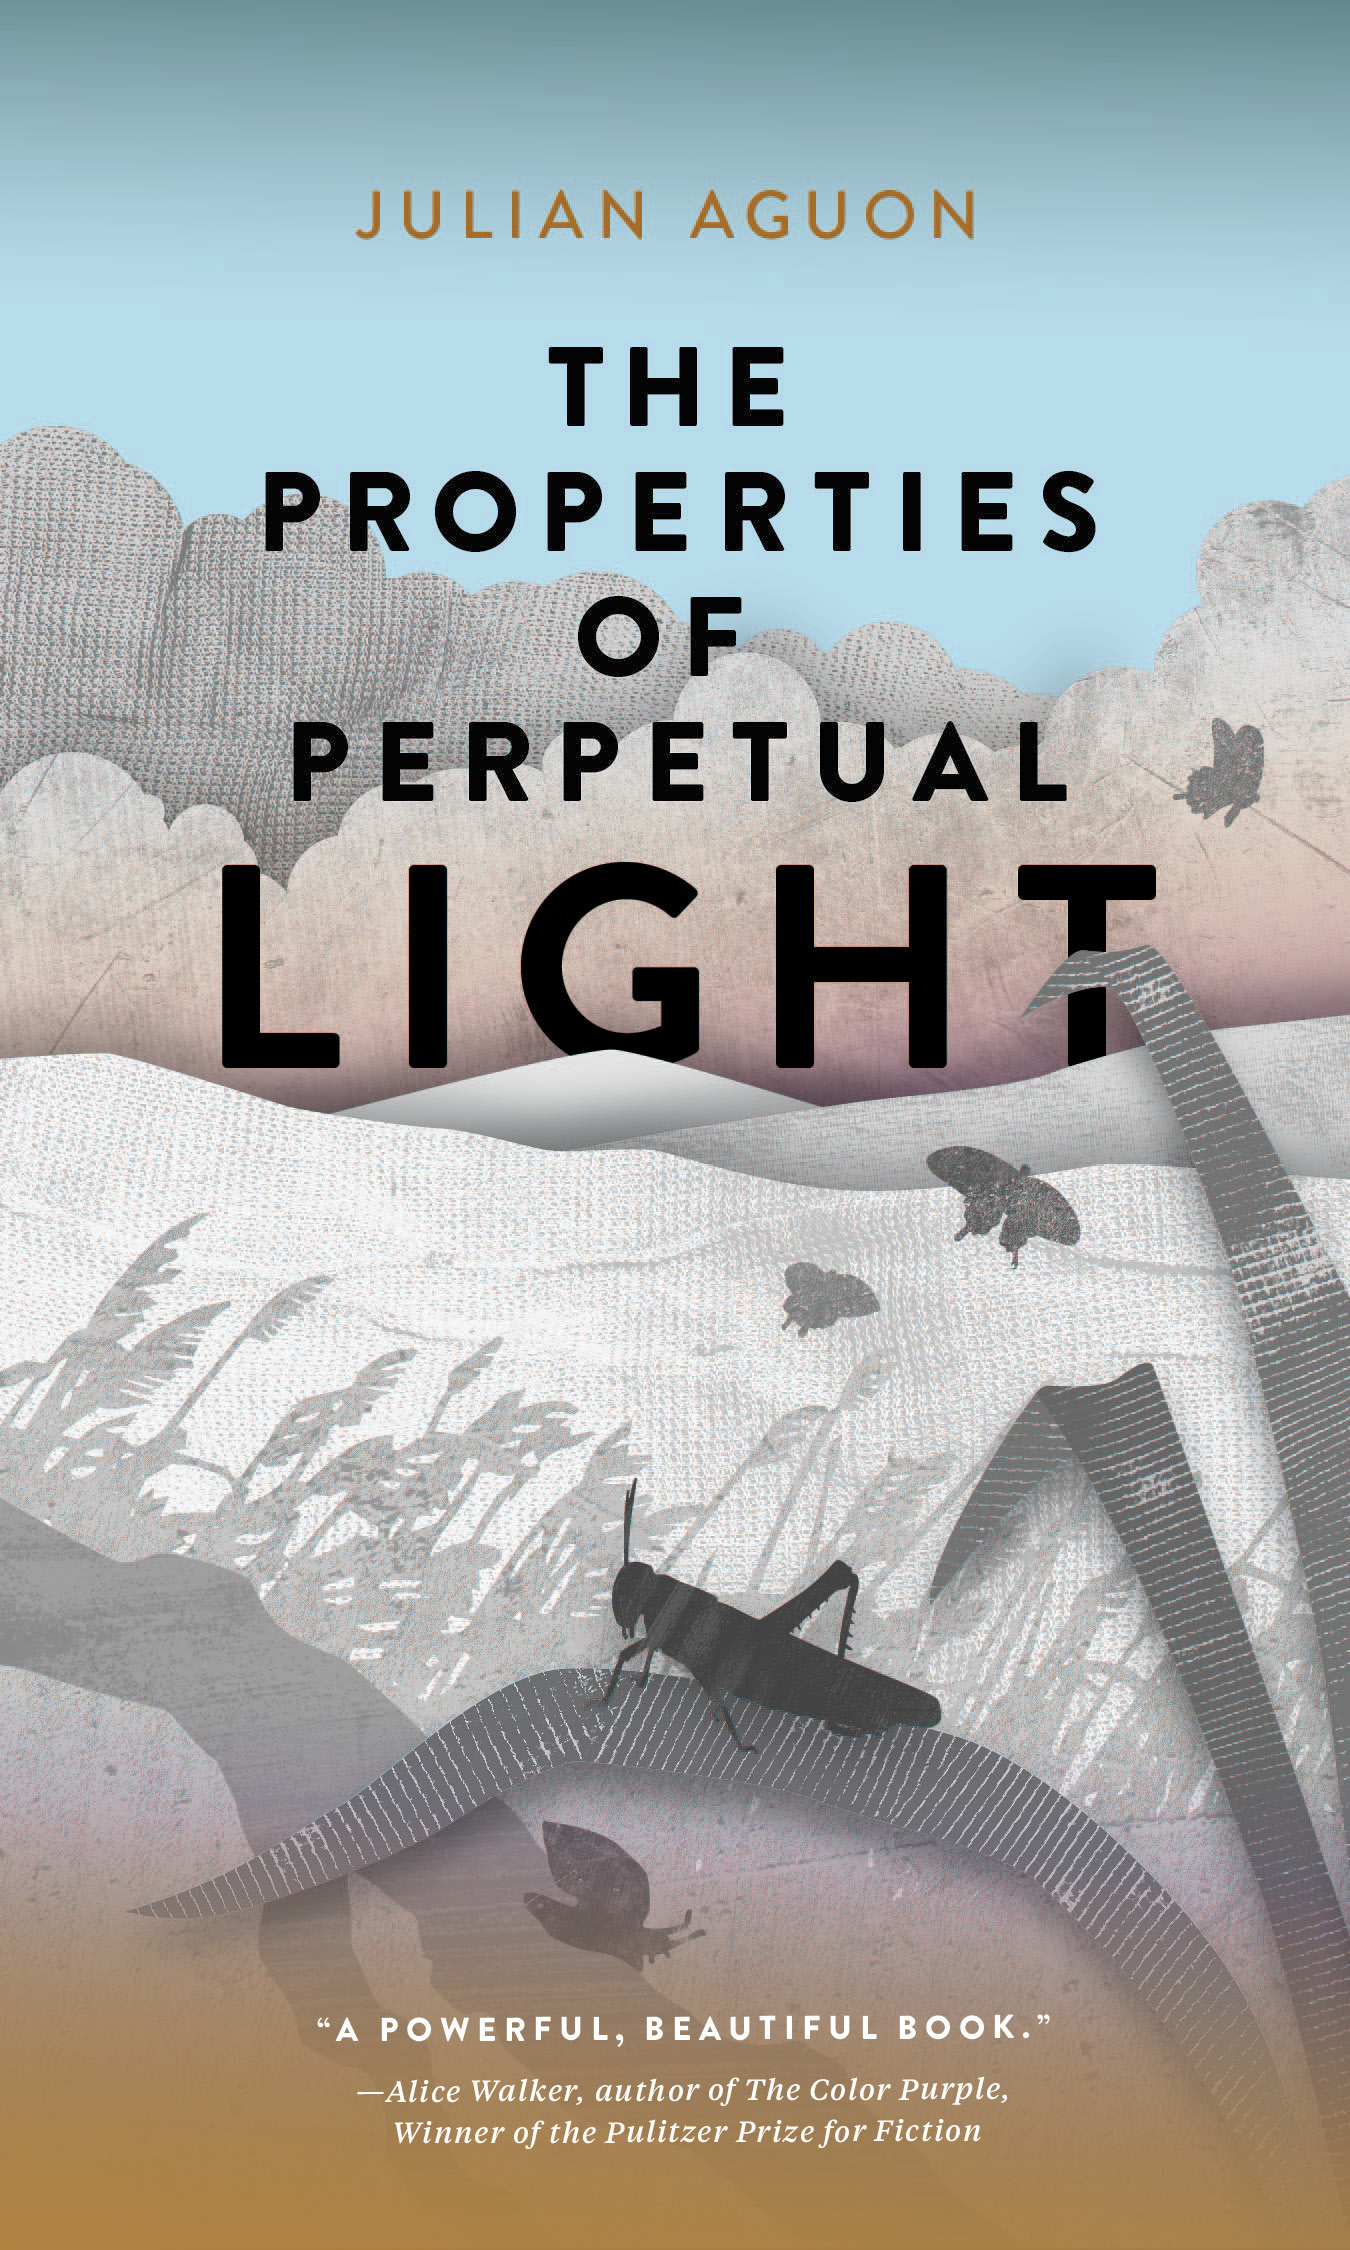 "The Properties of Perpetual Light" by Julian Aguon